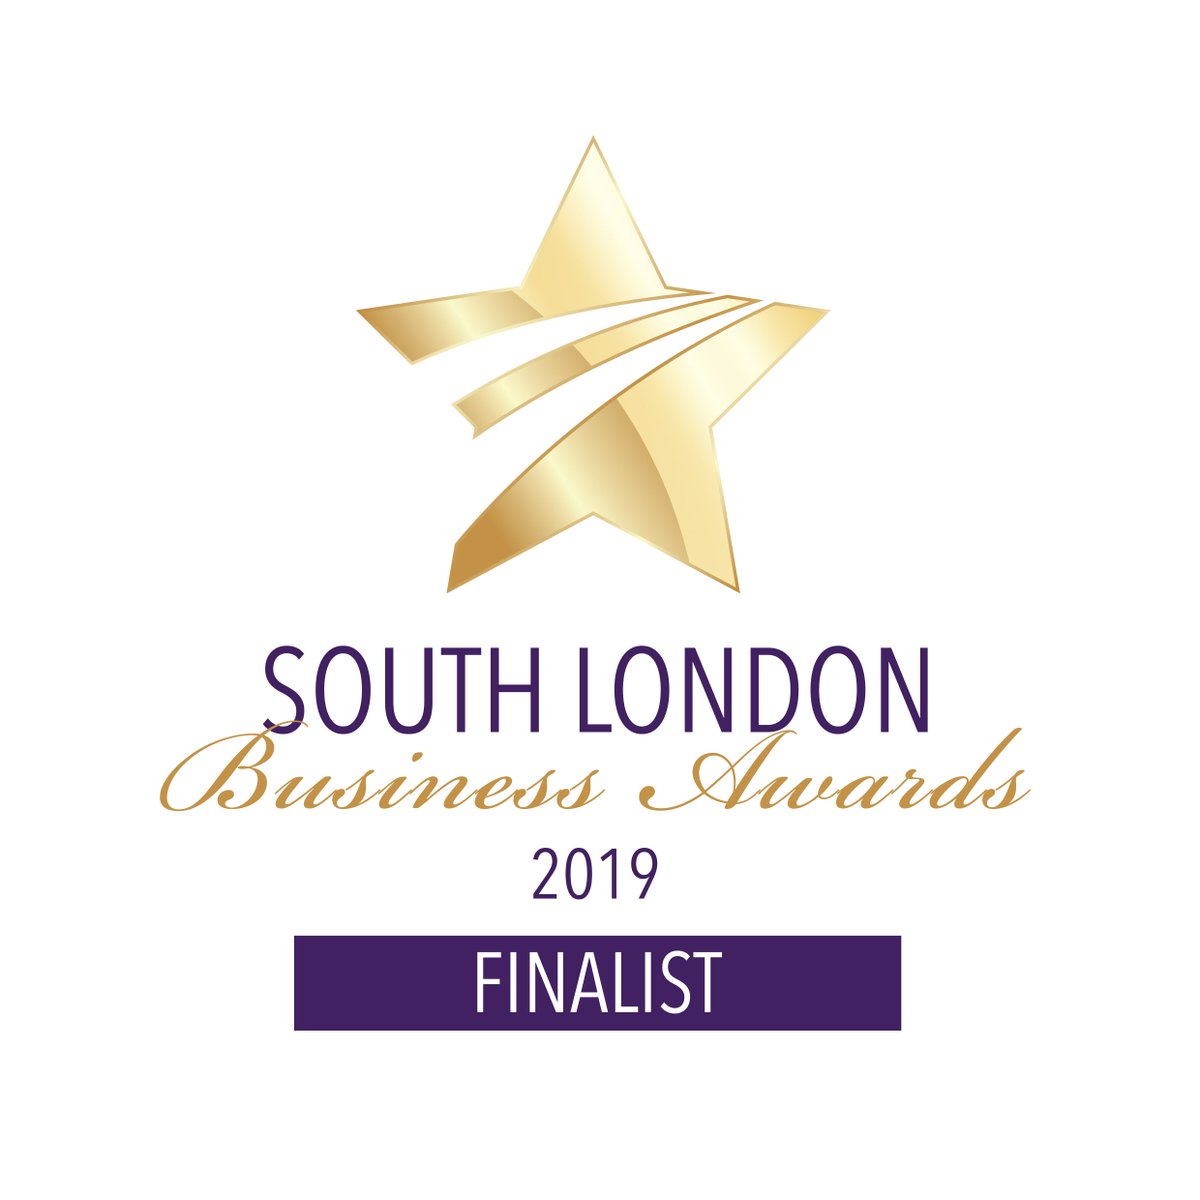 We've been shortlisted for 6 awards at the South London Business Awards!! Well done to the team and here's to the awards night!! @SLBizAwards #awards #marketingawards #marketingagency #agencylife #recognition #leadgeneration #businesdevelopment #bestcompaniestoworkfor